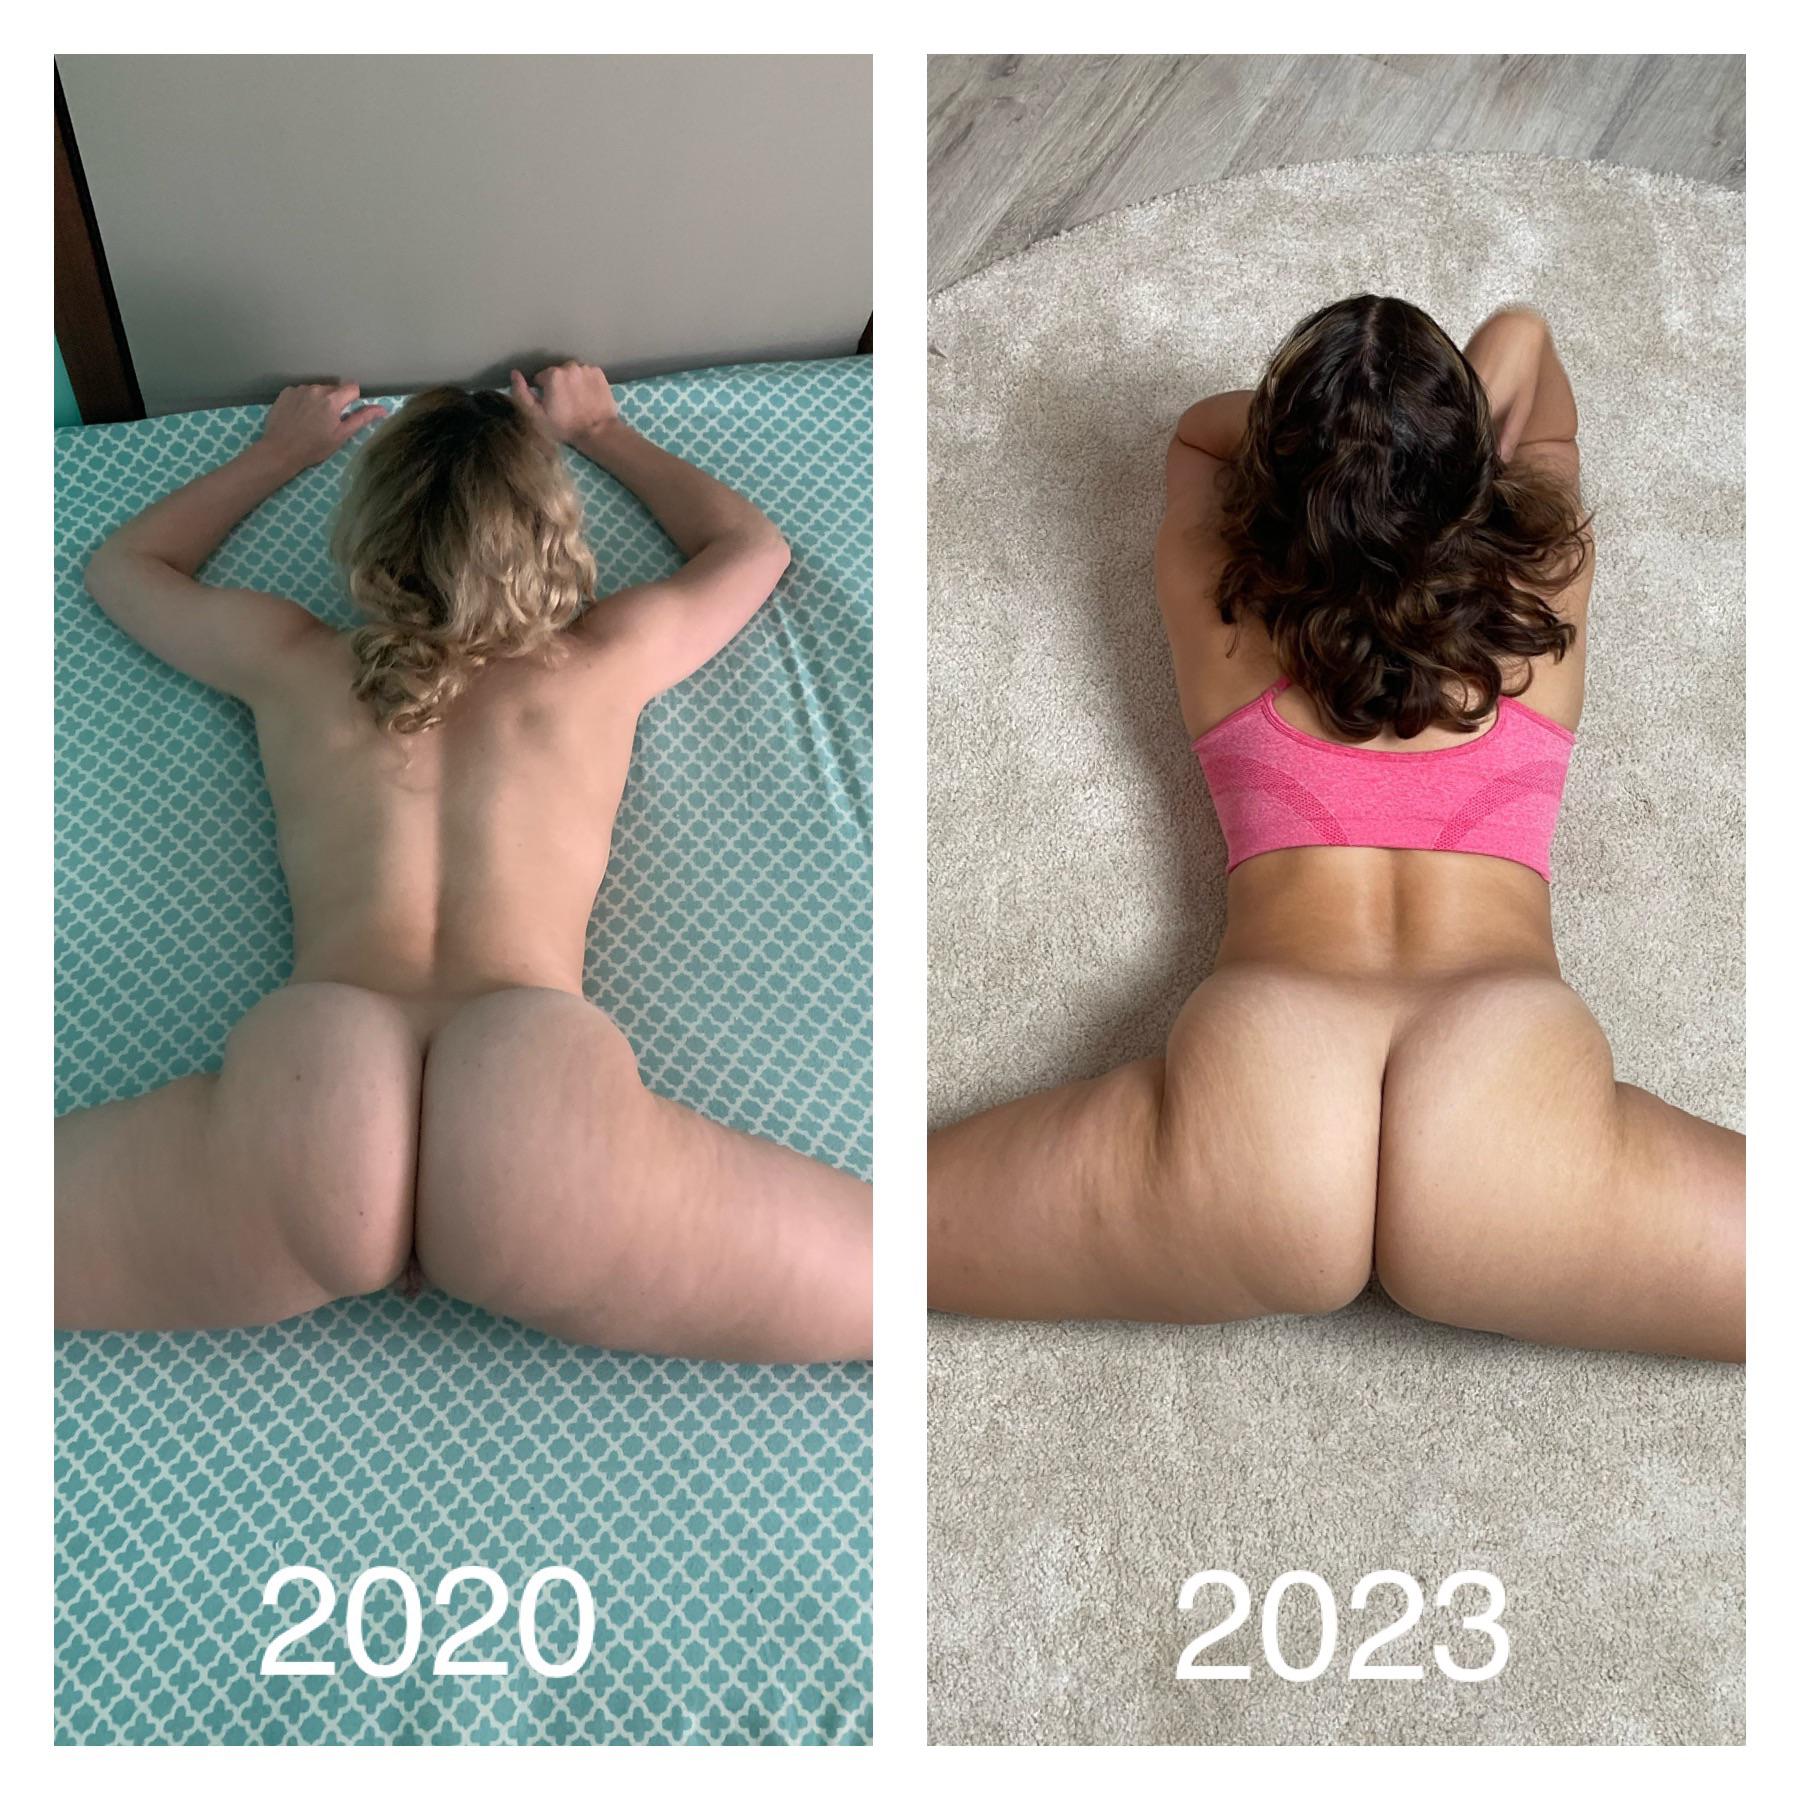 PAWG 3 years of posting here has seen my peach